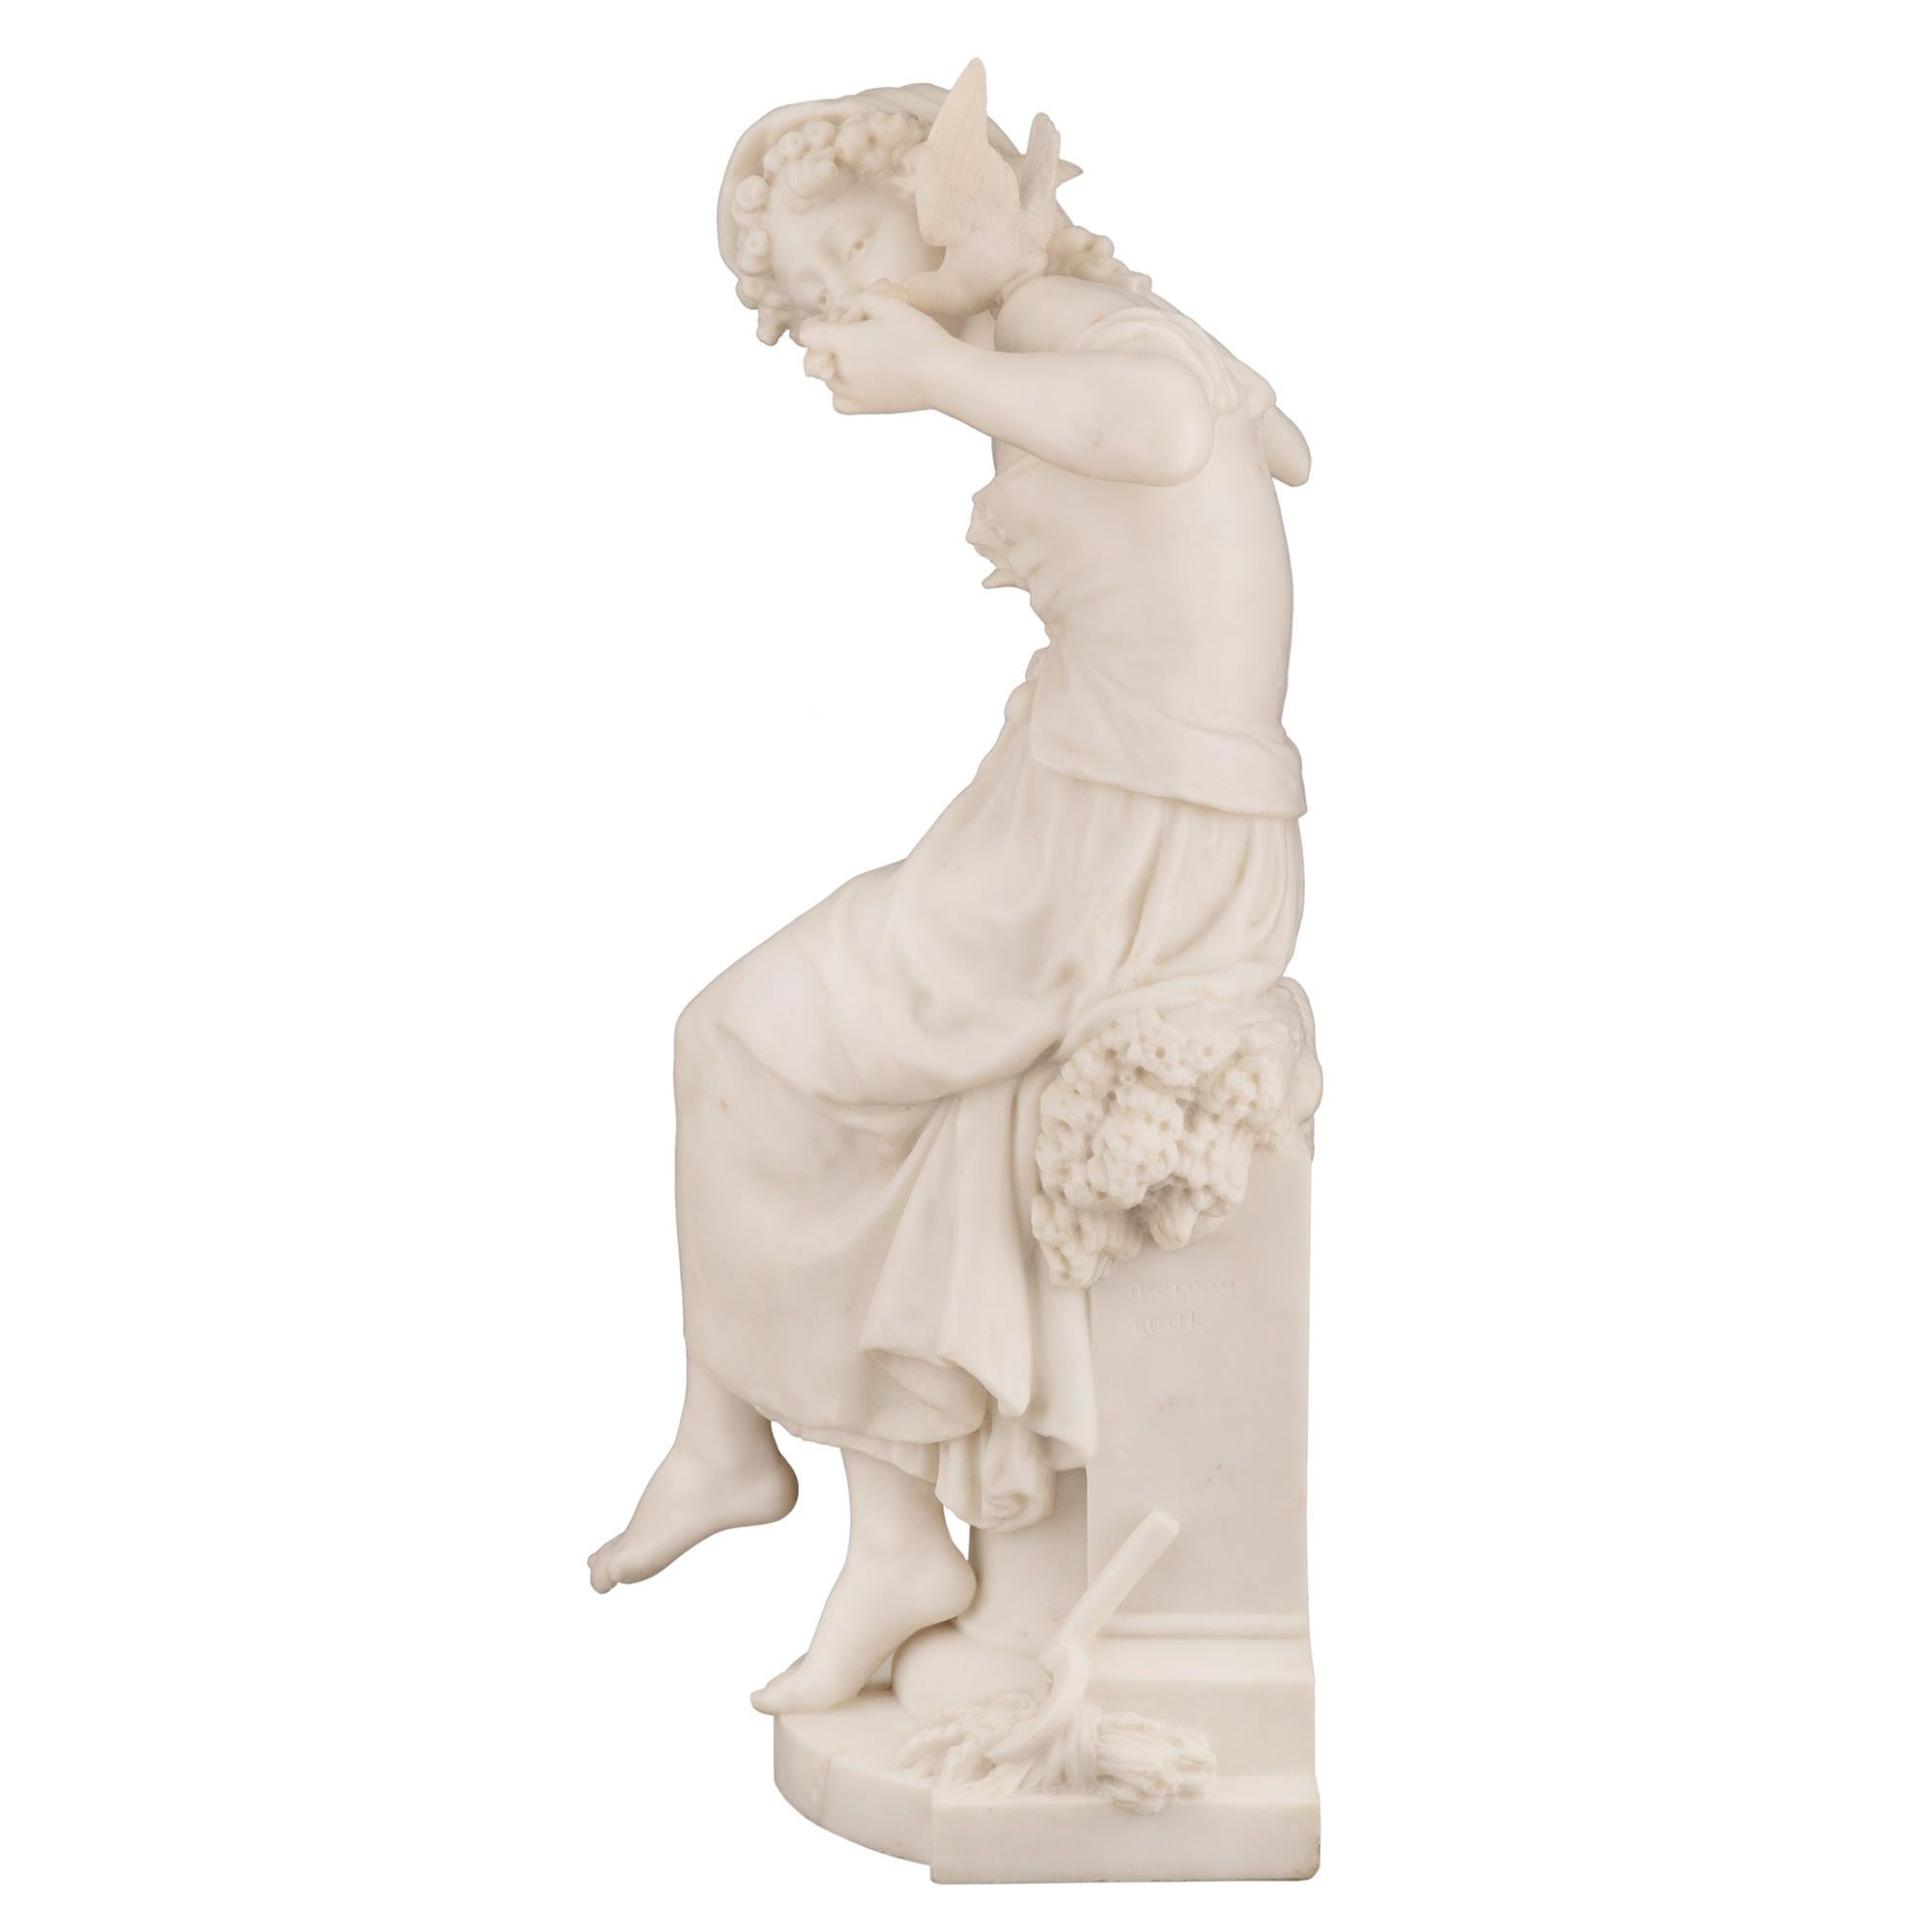 French 19th Century White Carrara Marble Statue of a Maiden, Signed Moreau For Sale 1